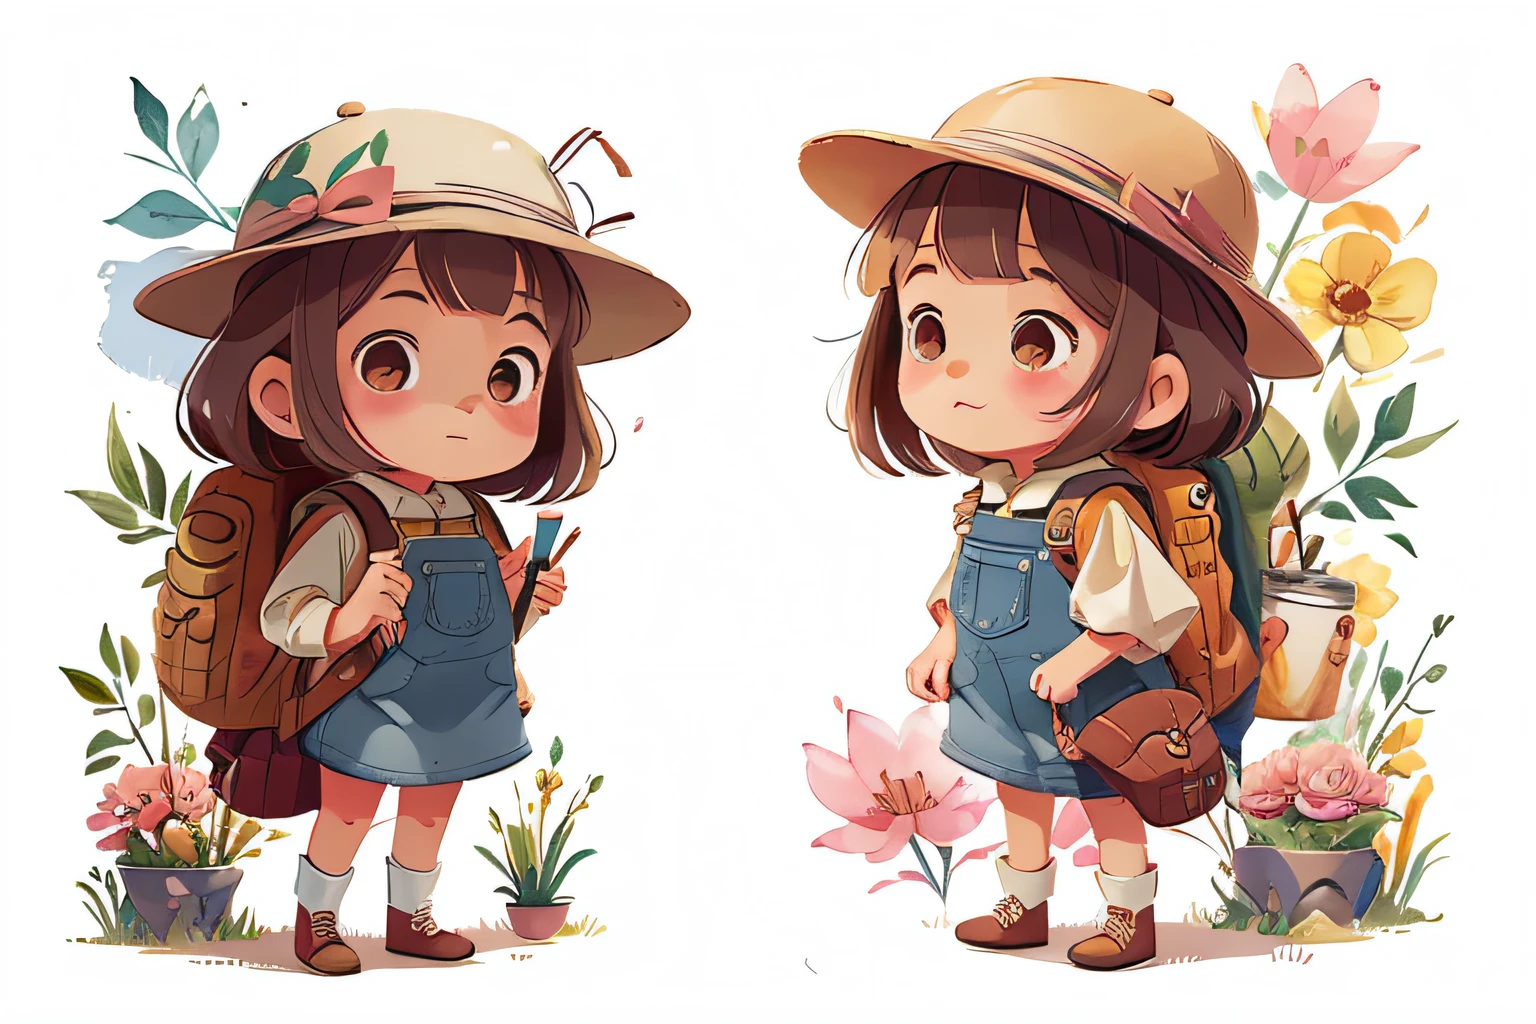 girl, watercolor, cute, character in different positions, full body, hat and backpack. The overall style is a mix of traditional painting and realistic elements, creating a visually stunning masterpiece.